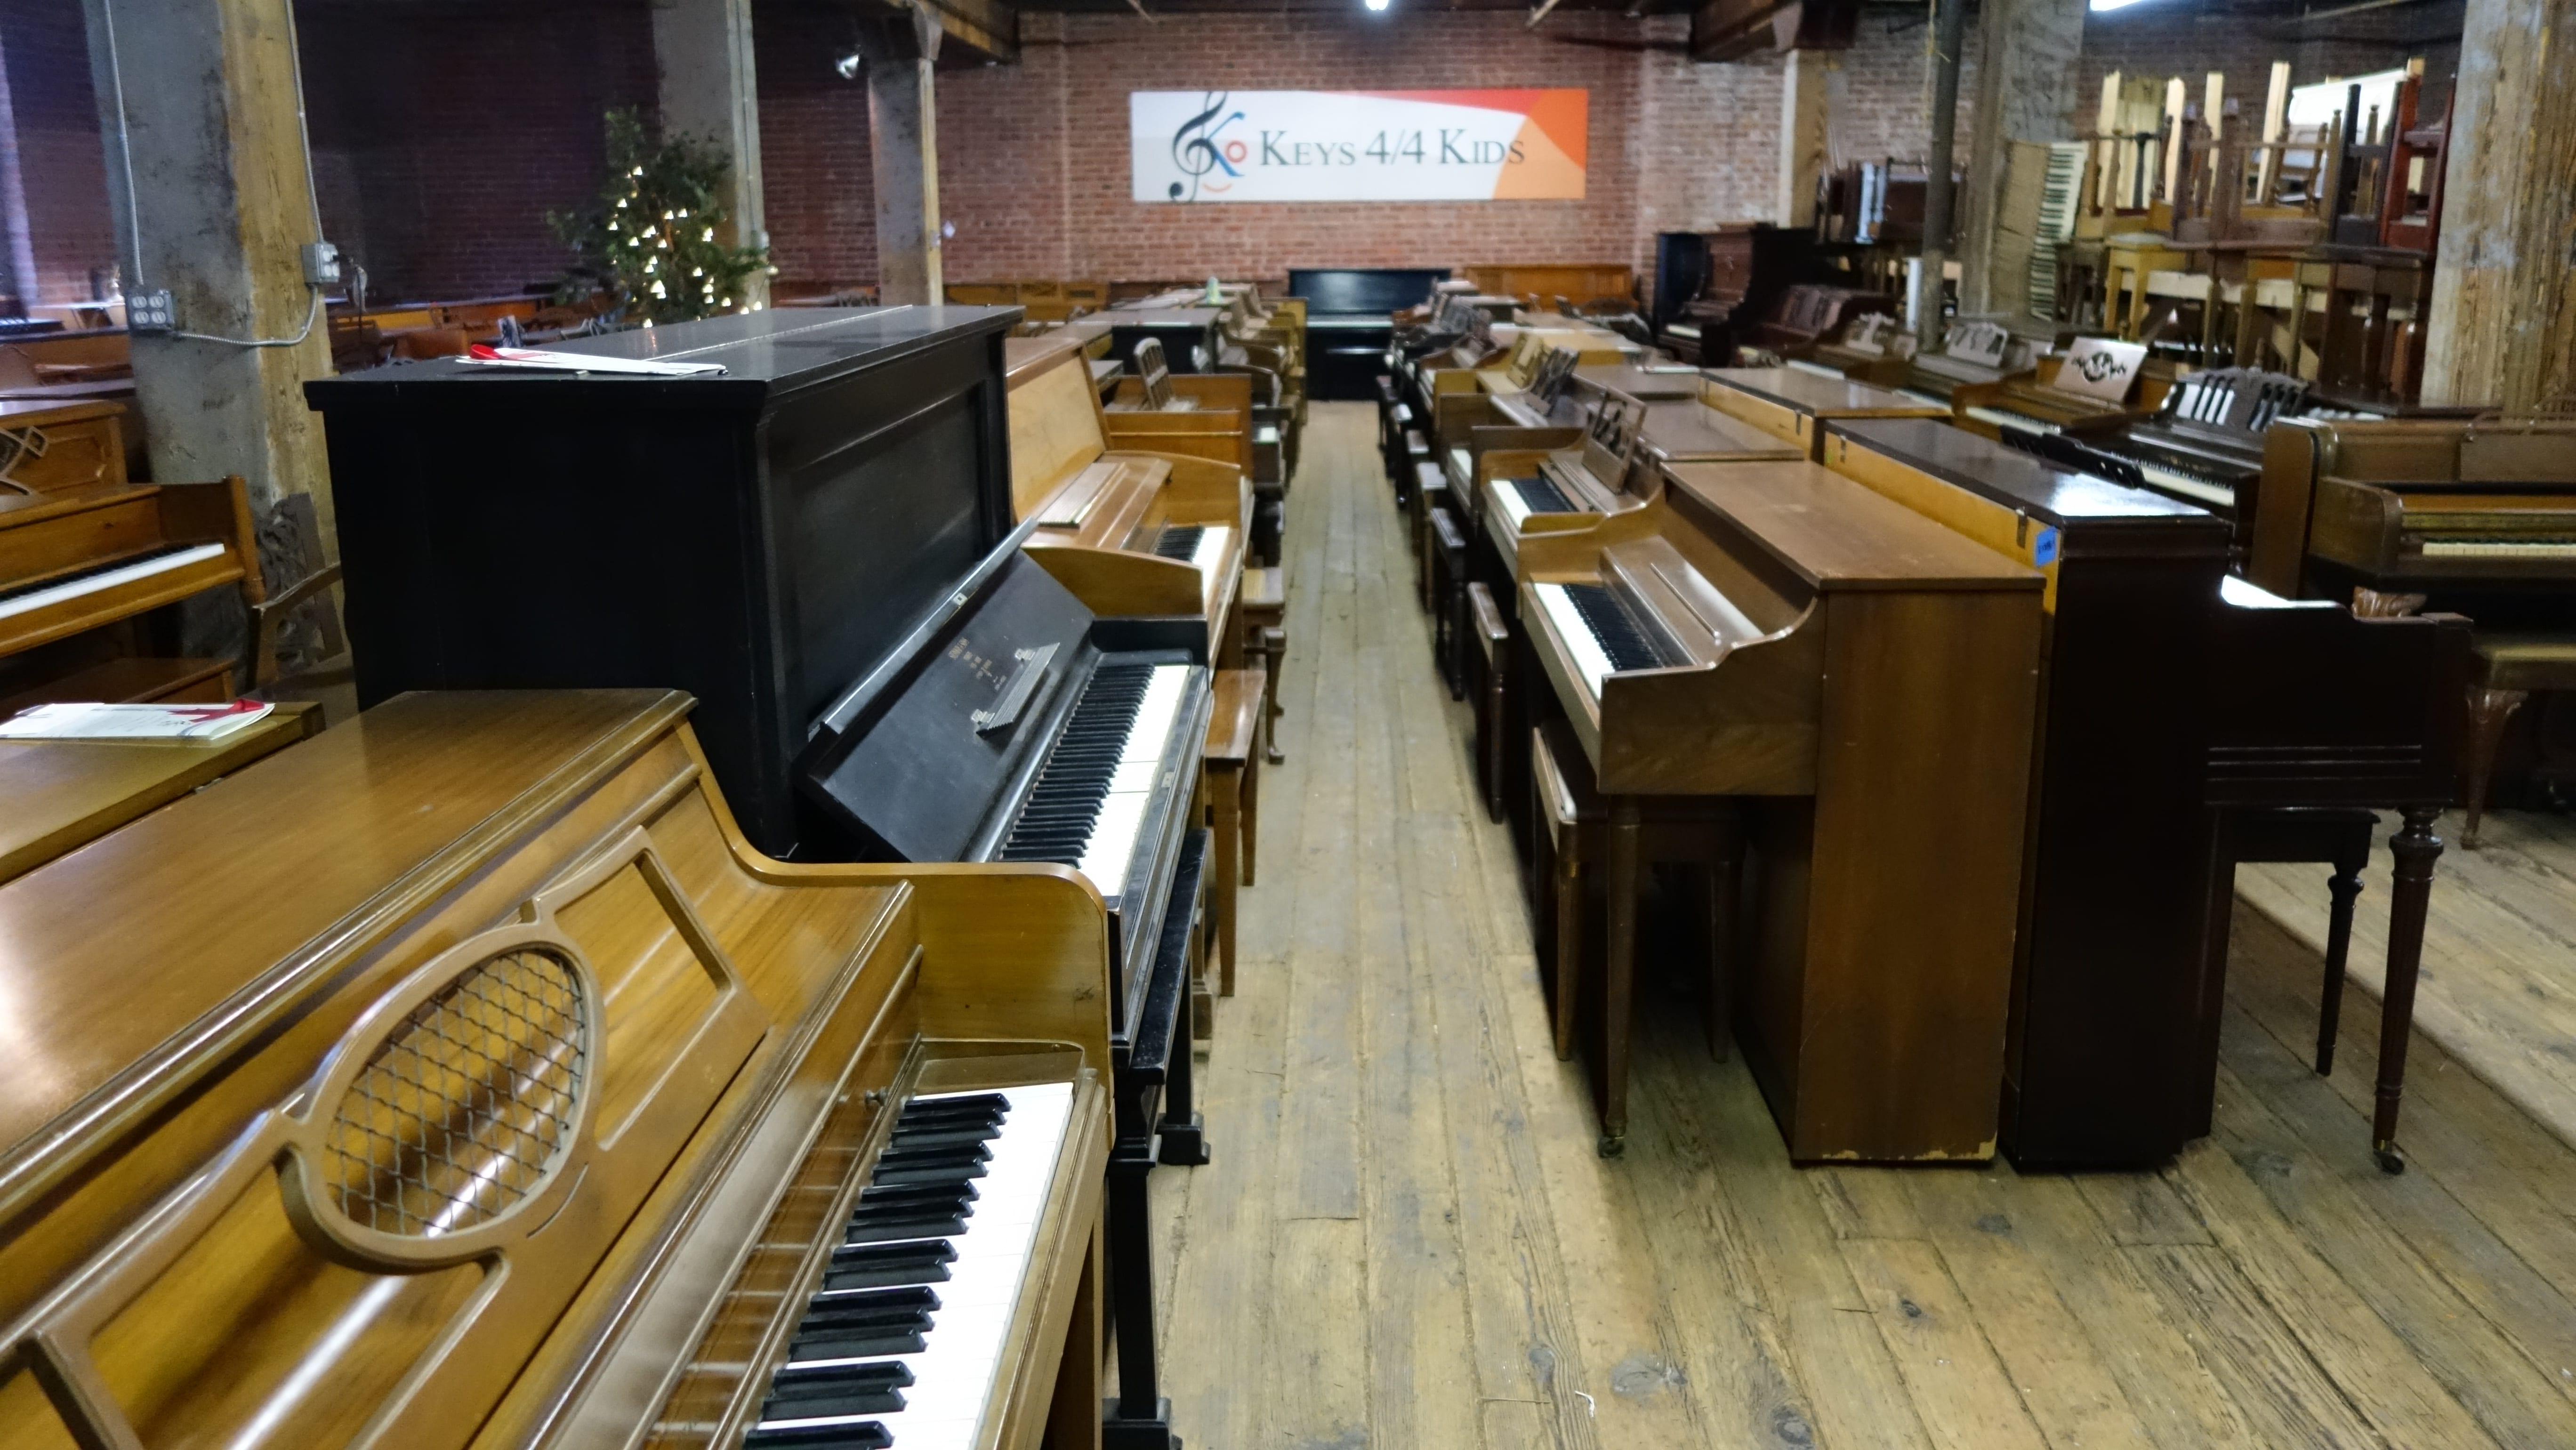 A room full of pianos.